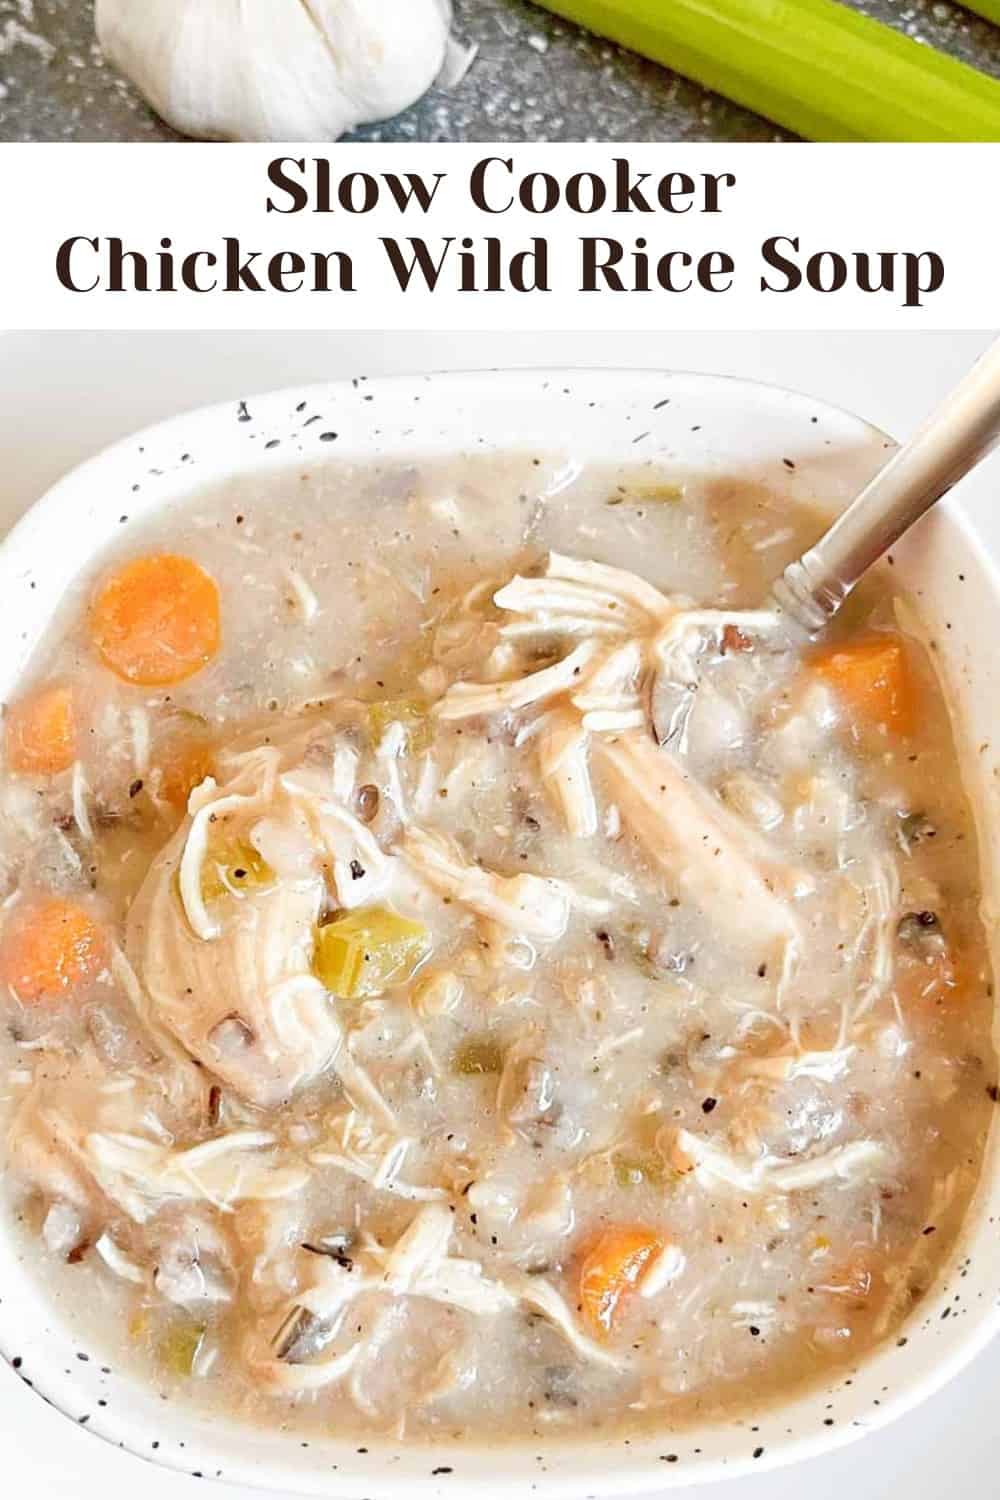 Slow cooker chicken and wild rice soup.